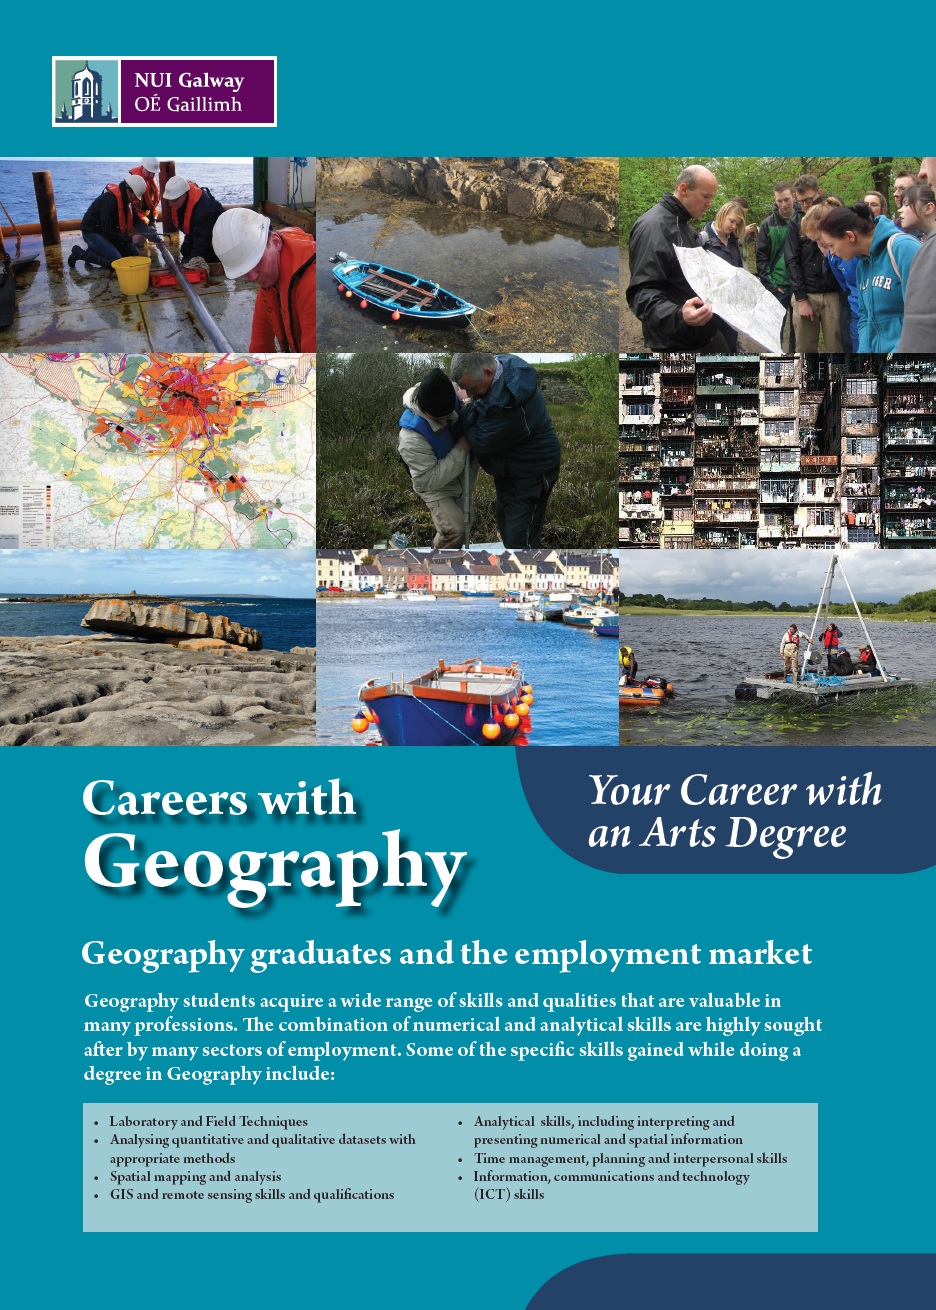 Careers in Geography